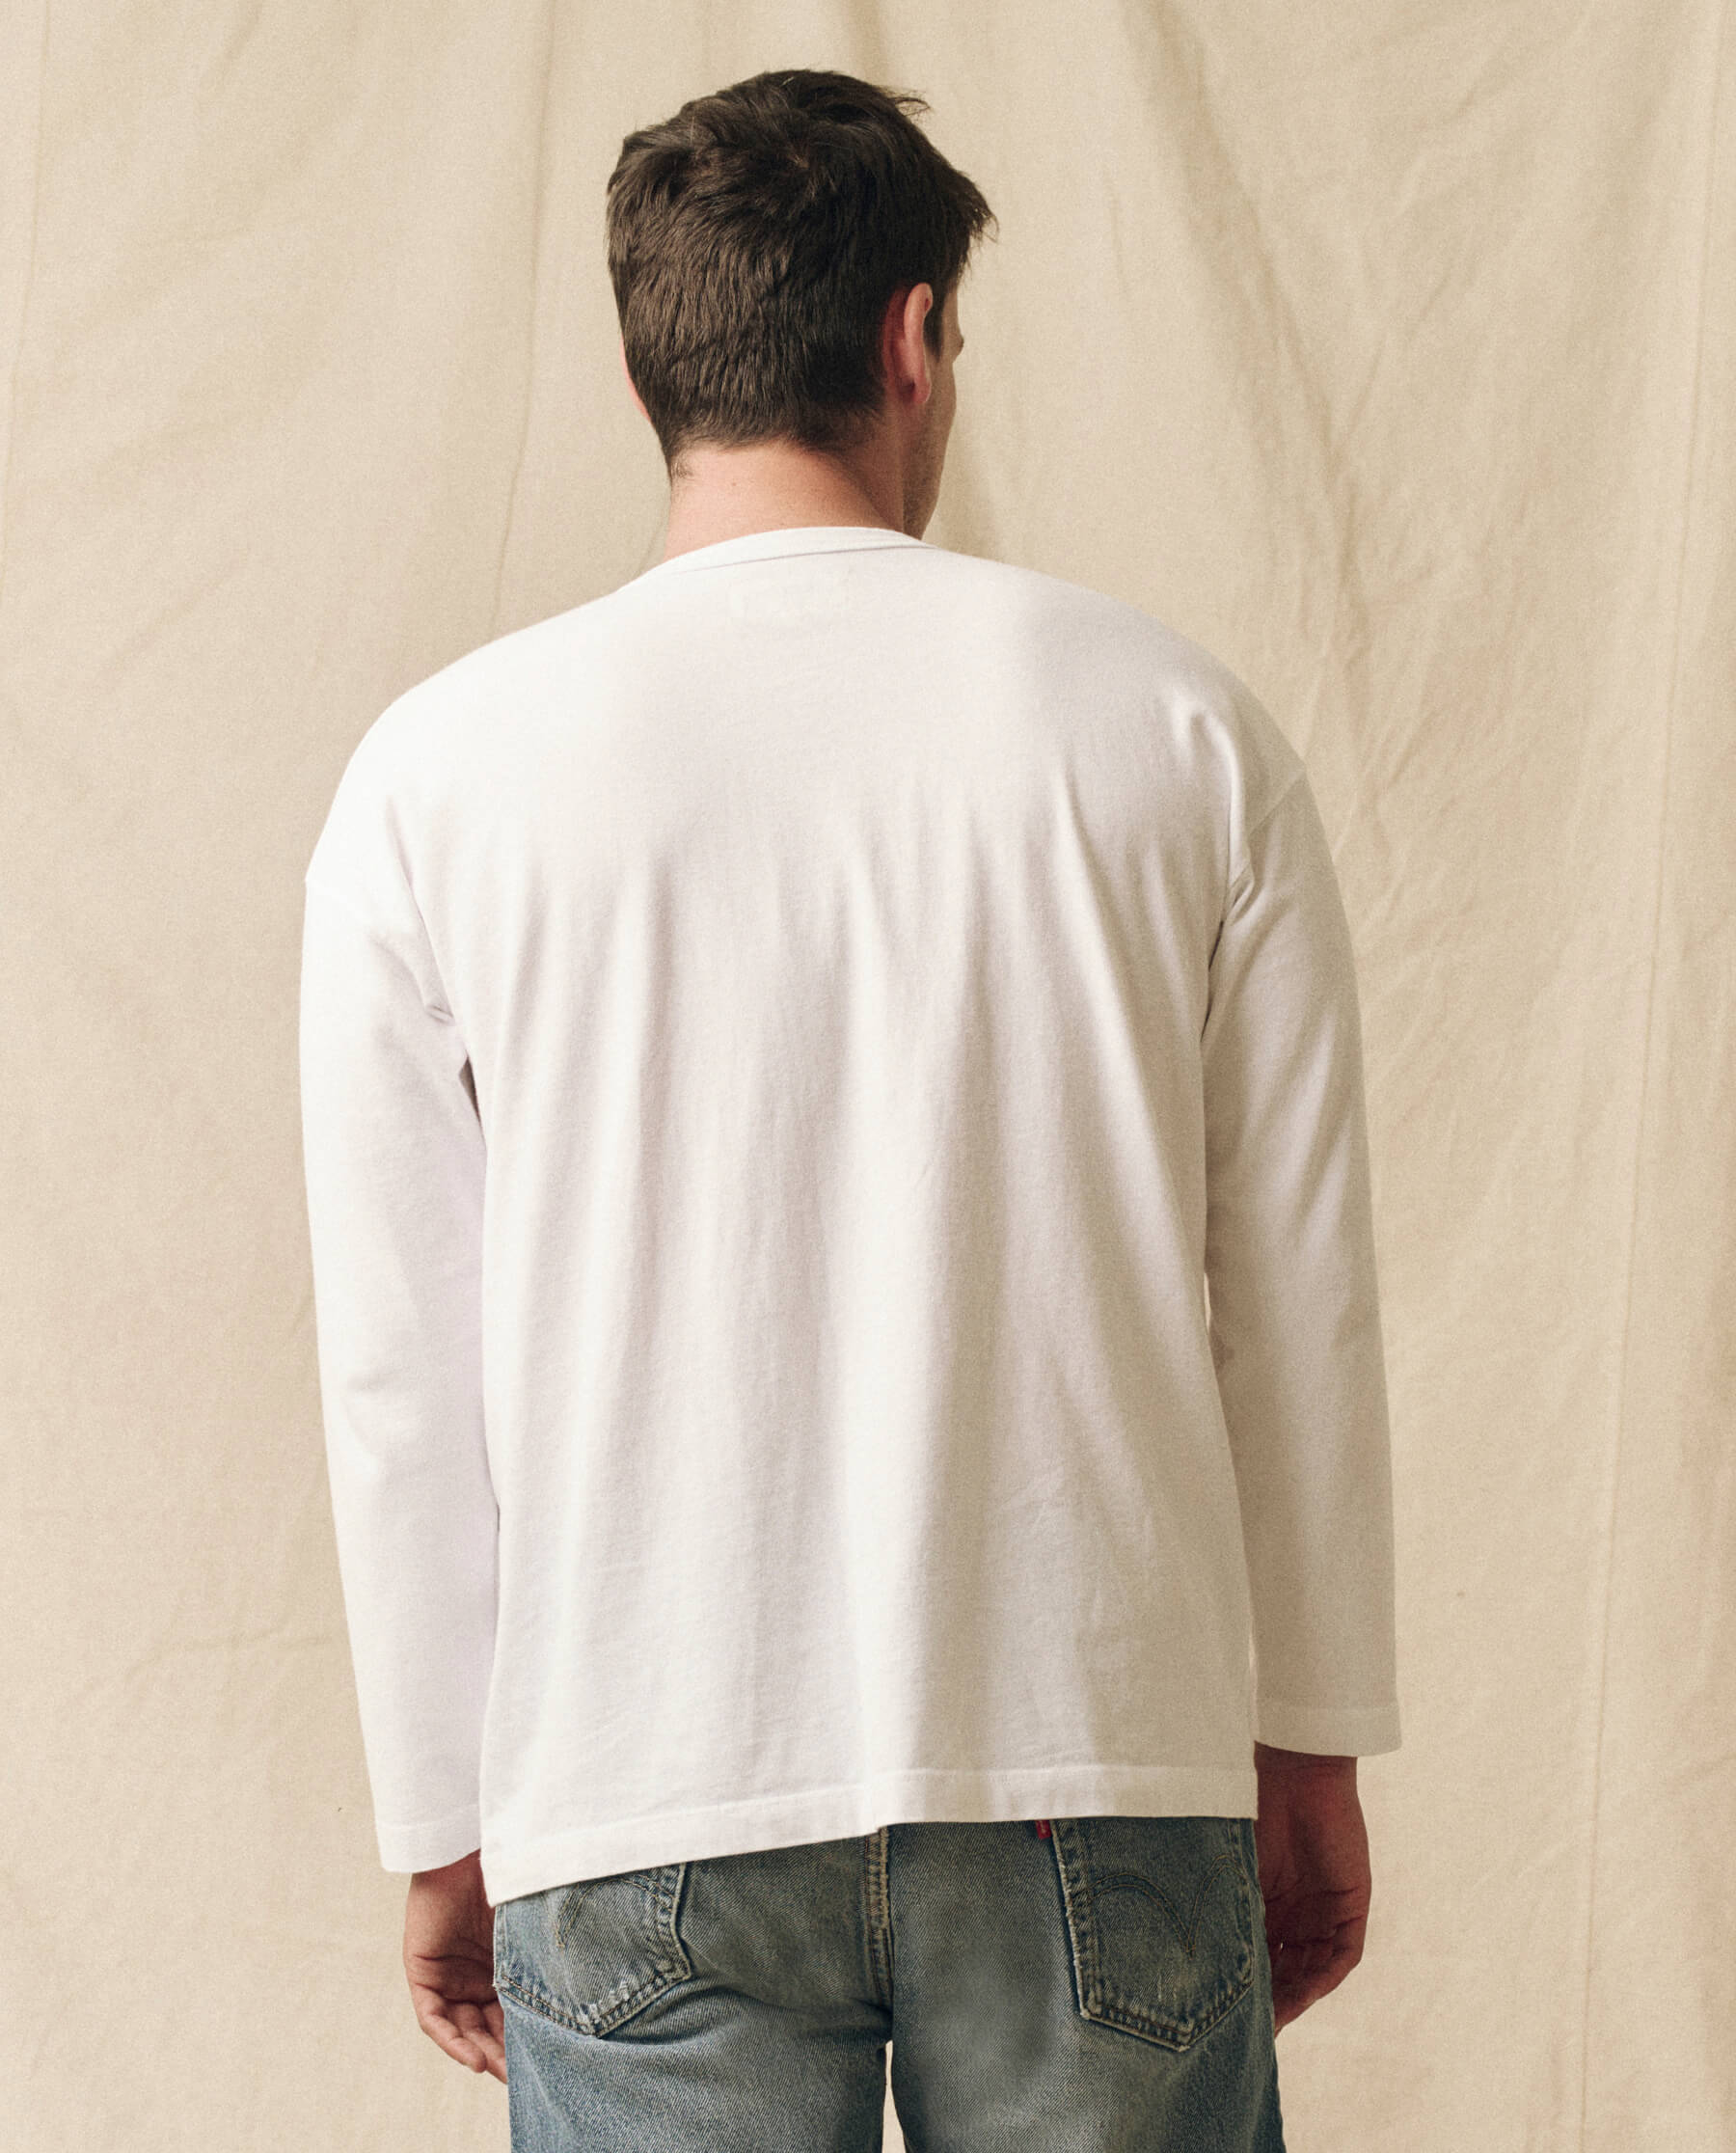 The Men's Pure Knits Long Sleeve Boxy Crew. Solid -- True White TEES THE GREAT. FALL 23 MEN